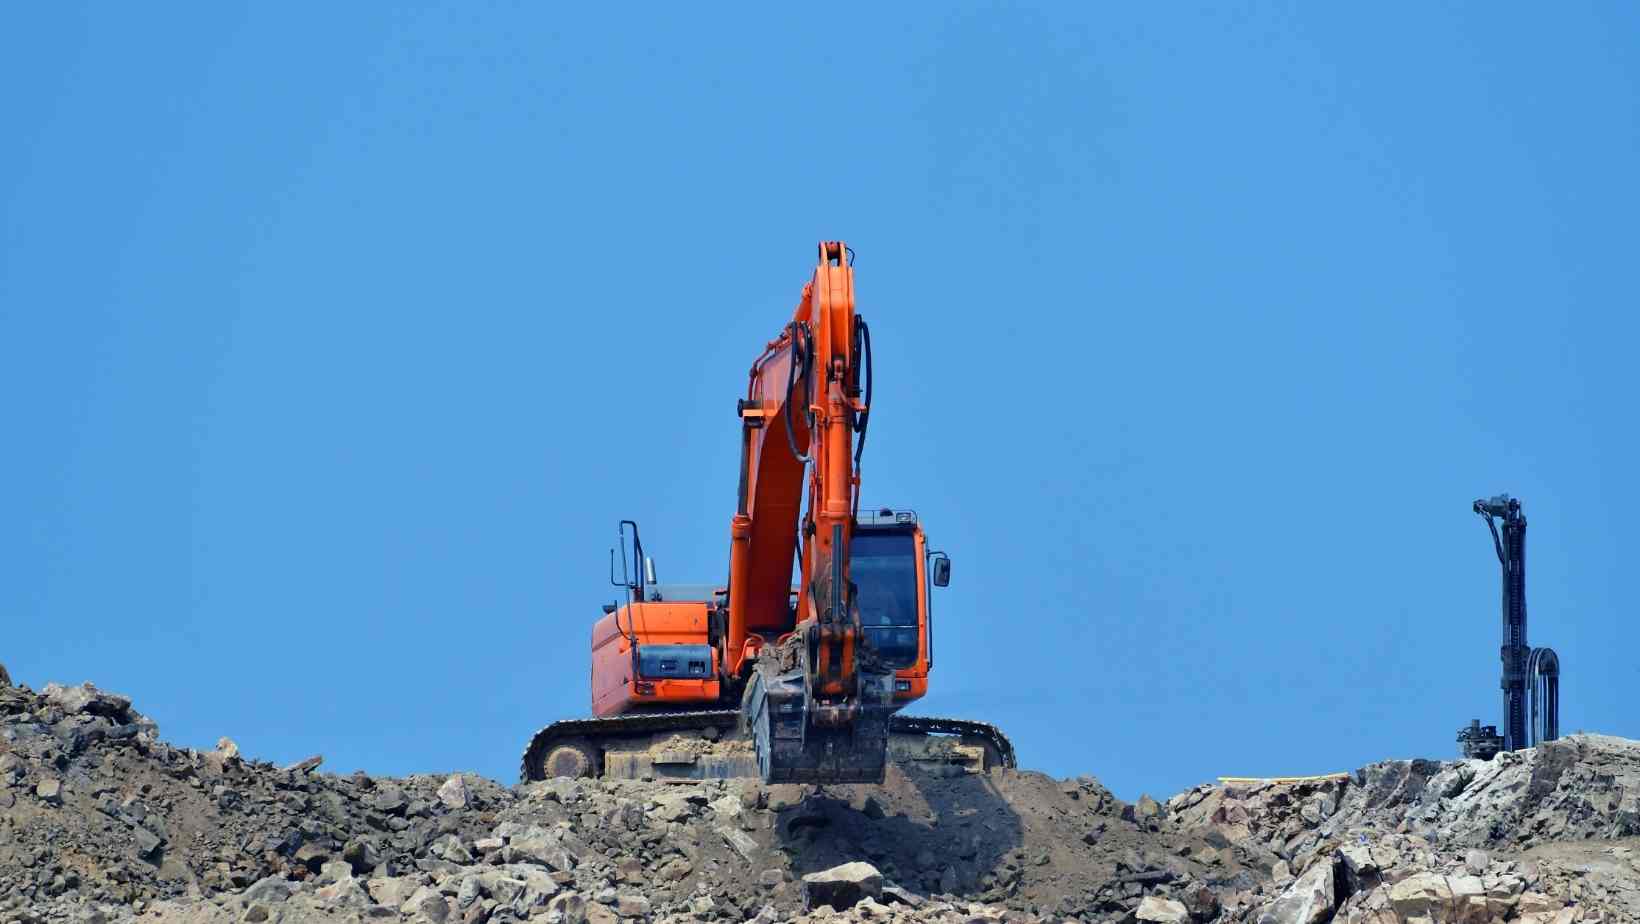 Hire Employees to Help Carry Out Excavating Services